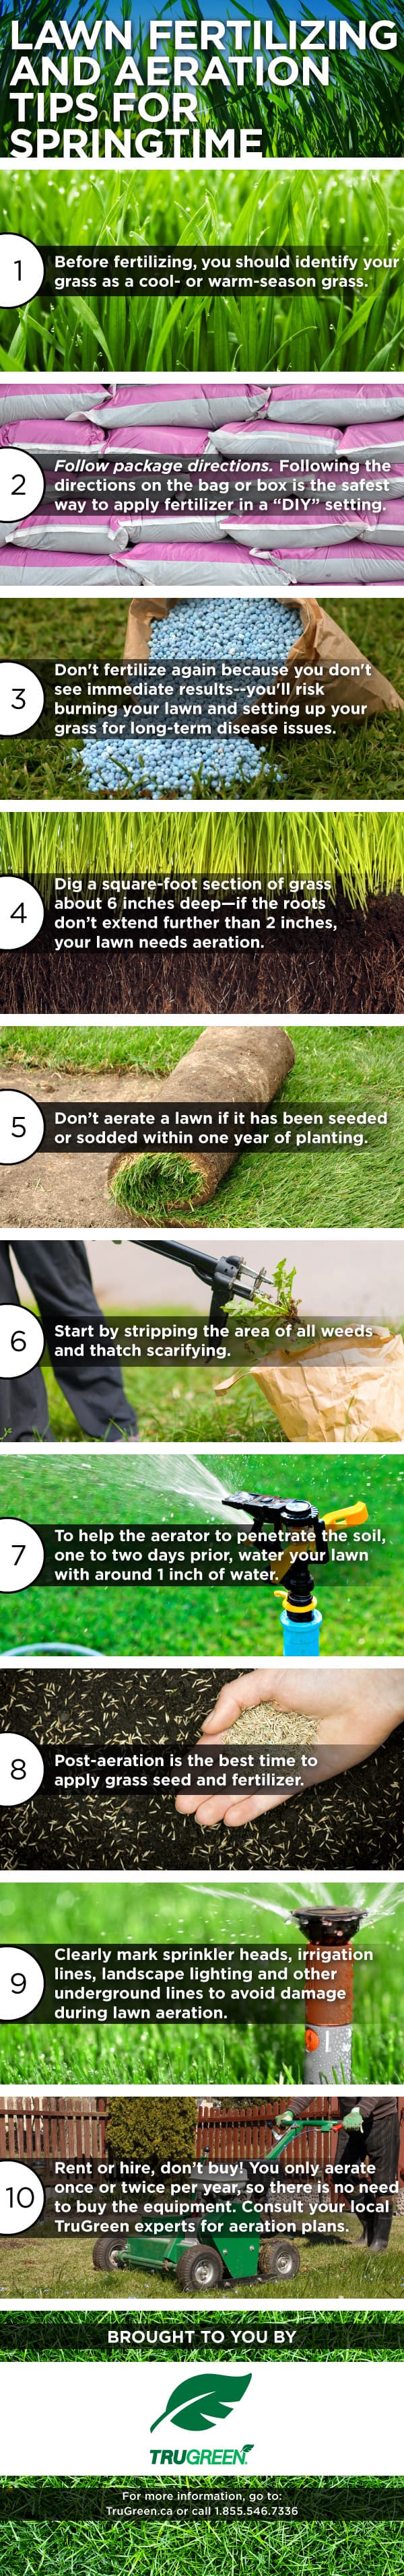 How to Prepare Your Yard for Spring - Simple tips to get your yard looking its best for the upcoming season.